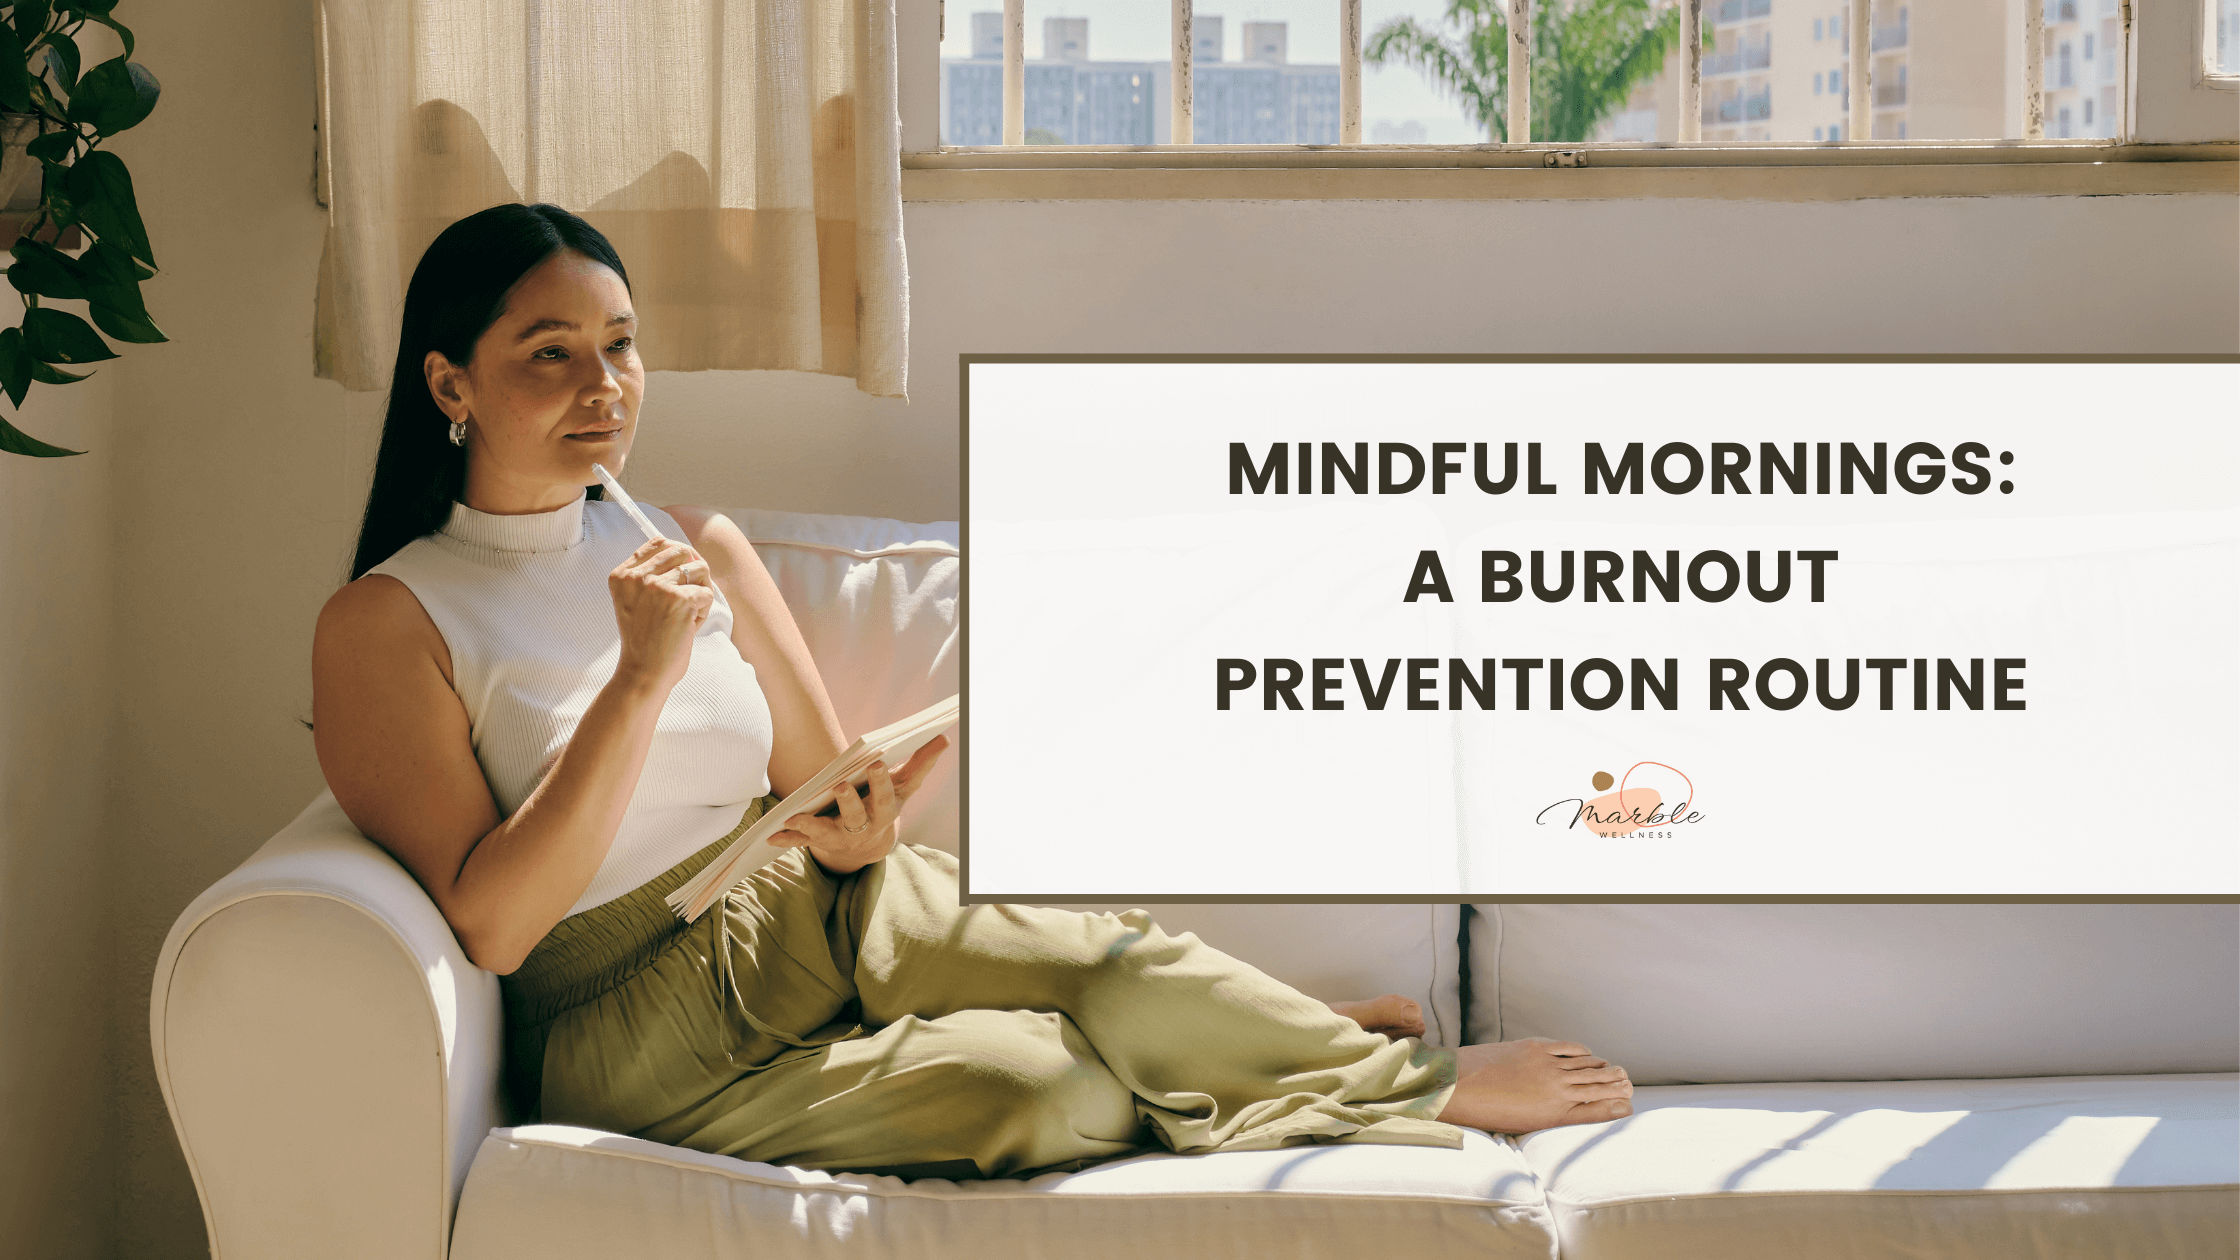 7 Tips for Creating a Mindful Morning Routine to Prevent Burnout